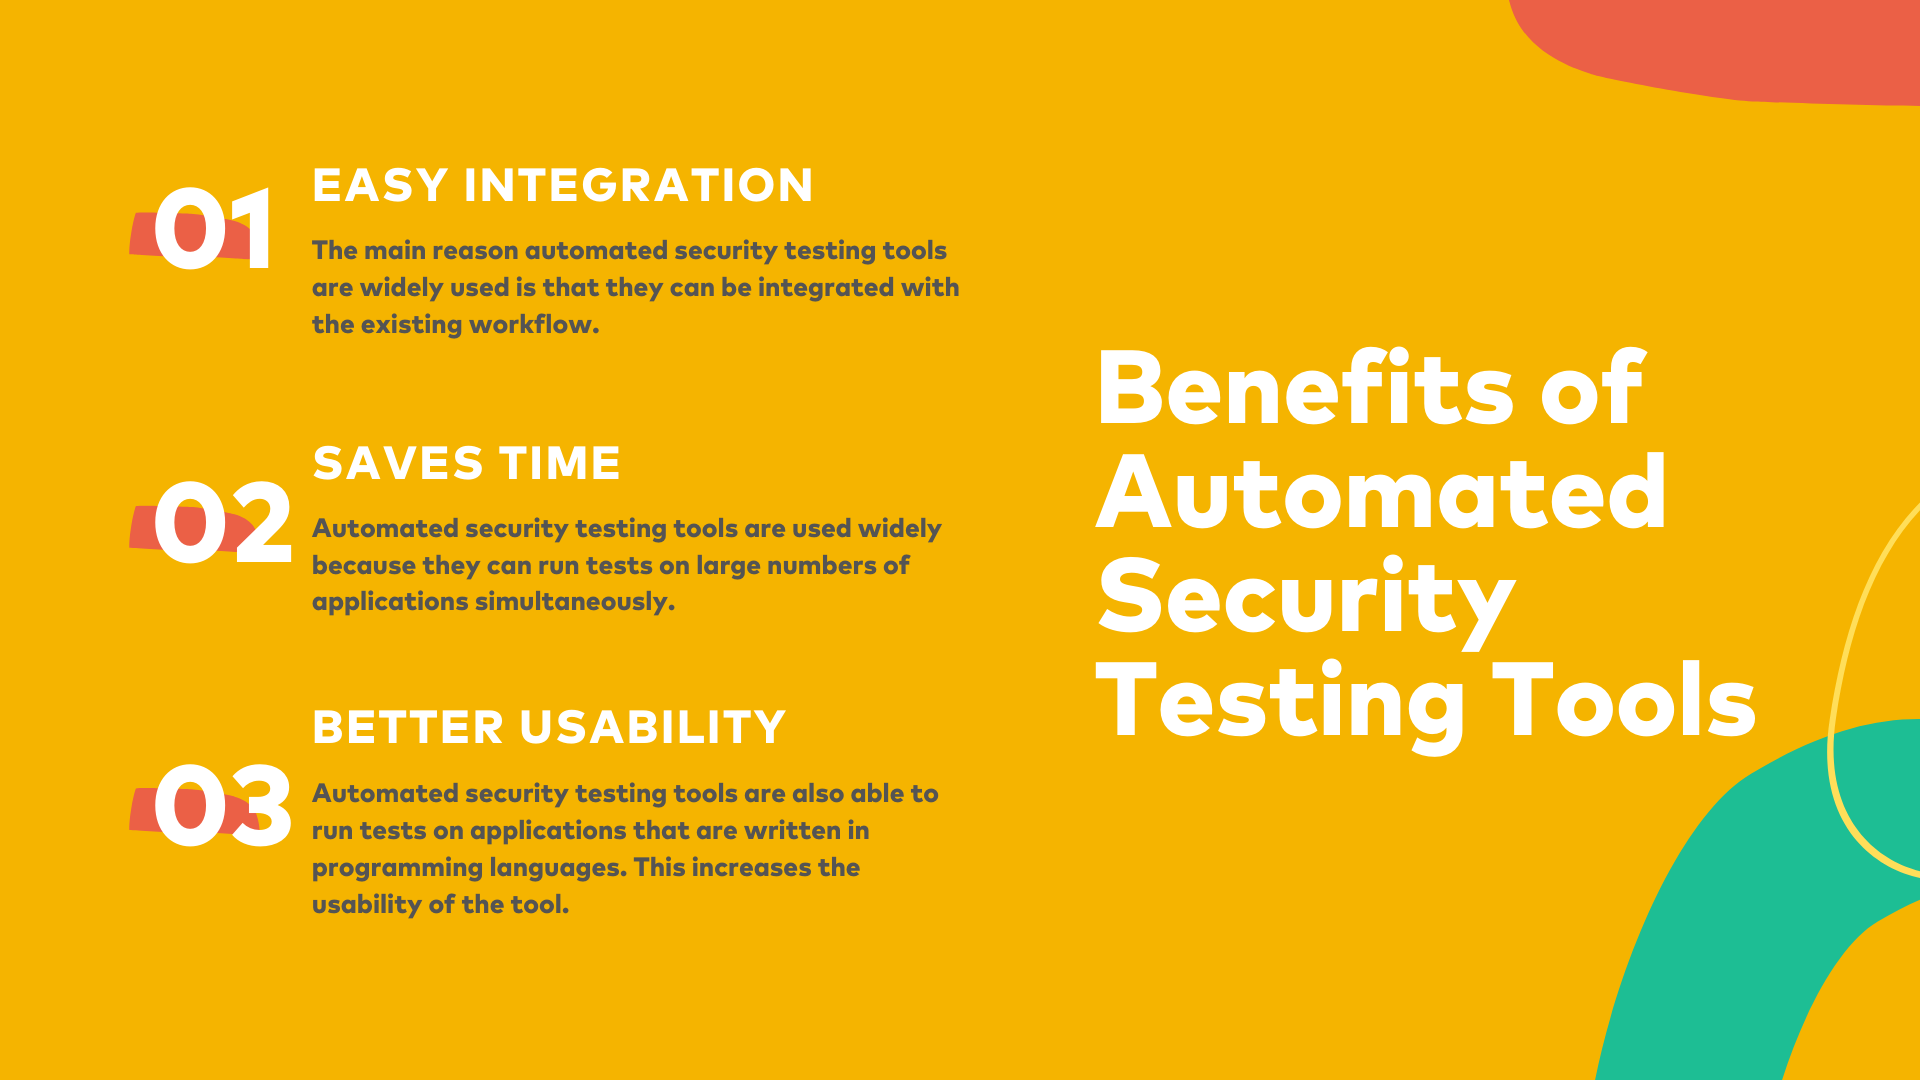 Benefits of Automated Security Testing Tools